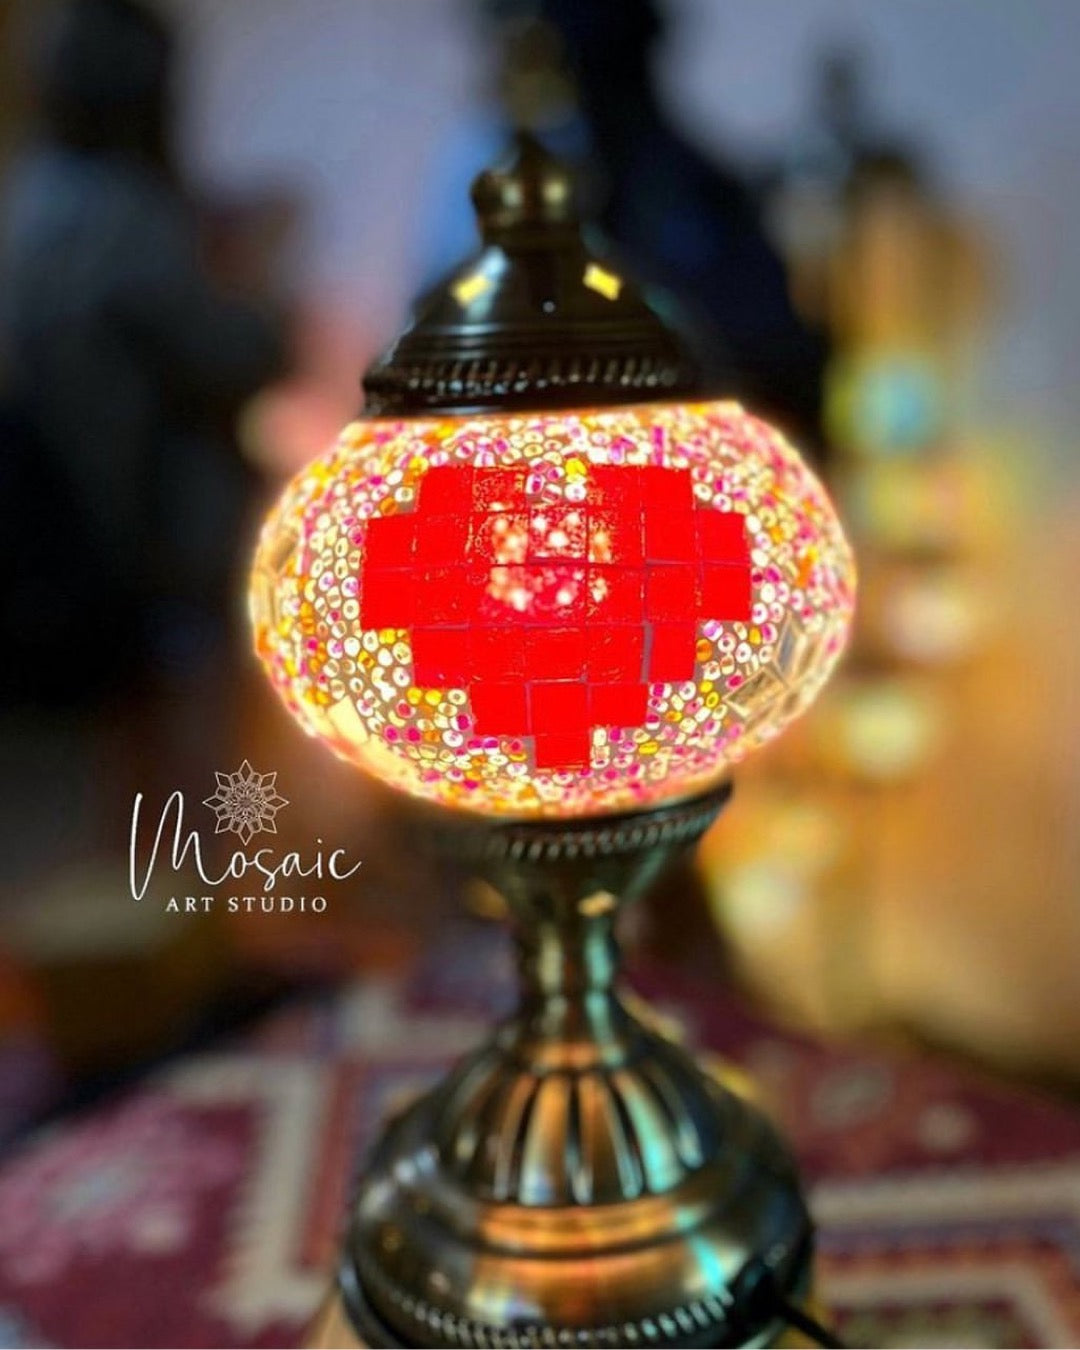 turkish mosaic lamp with heart shape on it made with only square shape glass mosaics